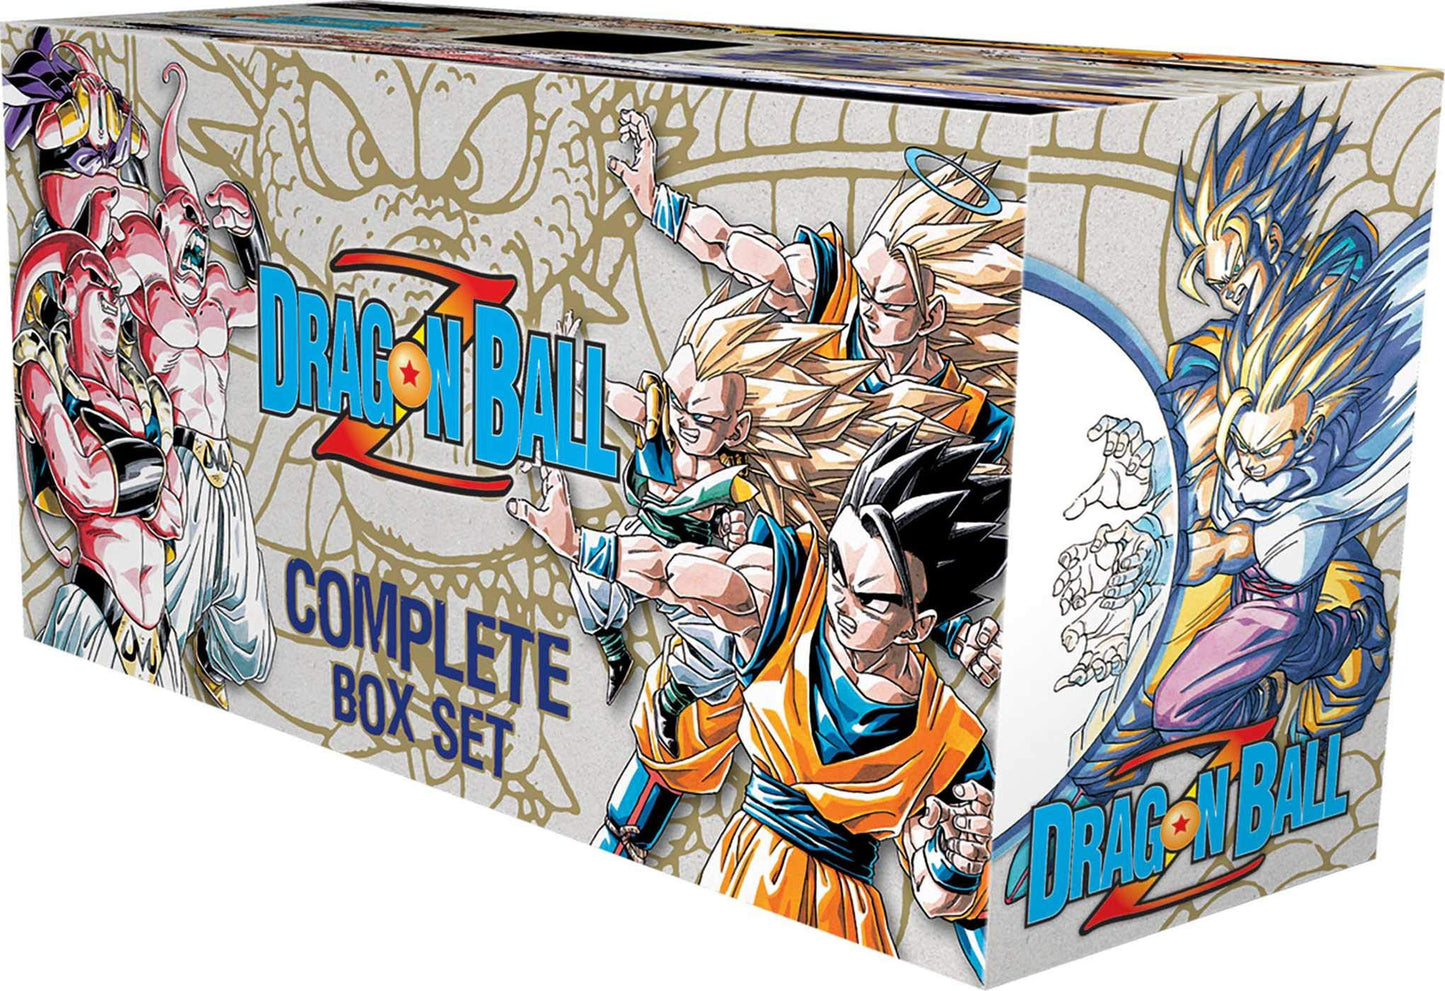 Dragon Ball Z Complete Box Set: Vols. 1-26 with Premium (Dragon Ball Z Complete Box Set)